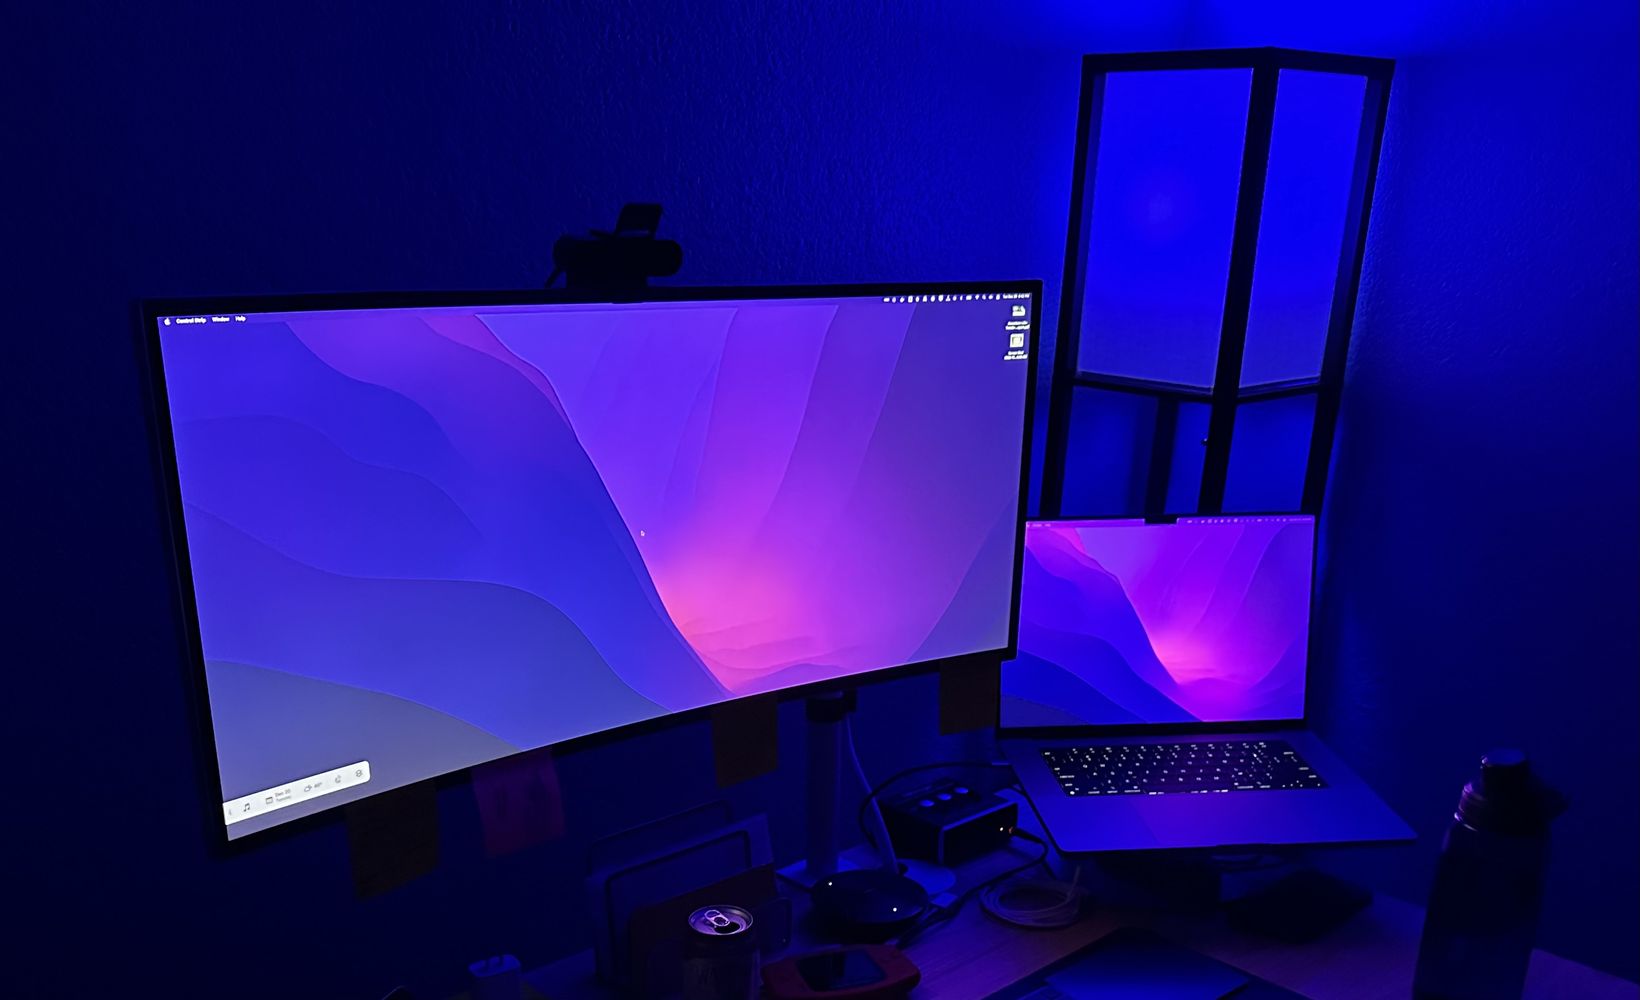 Widescreen monitor on a desk with dark blue lighting in the background